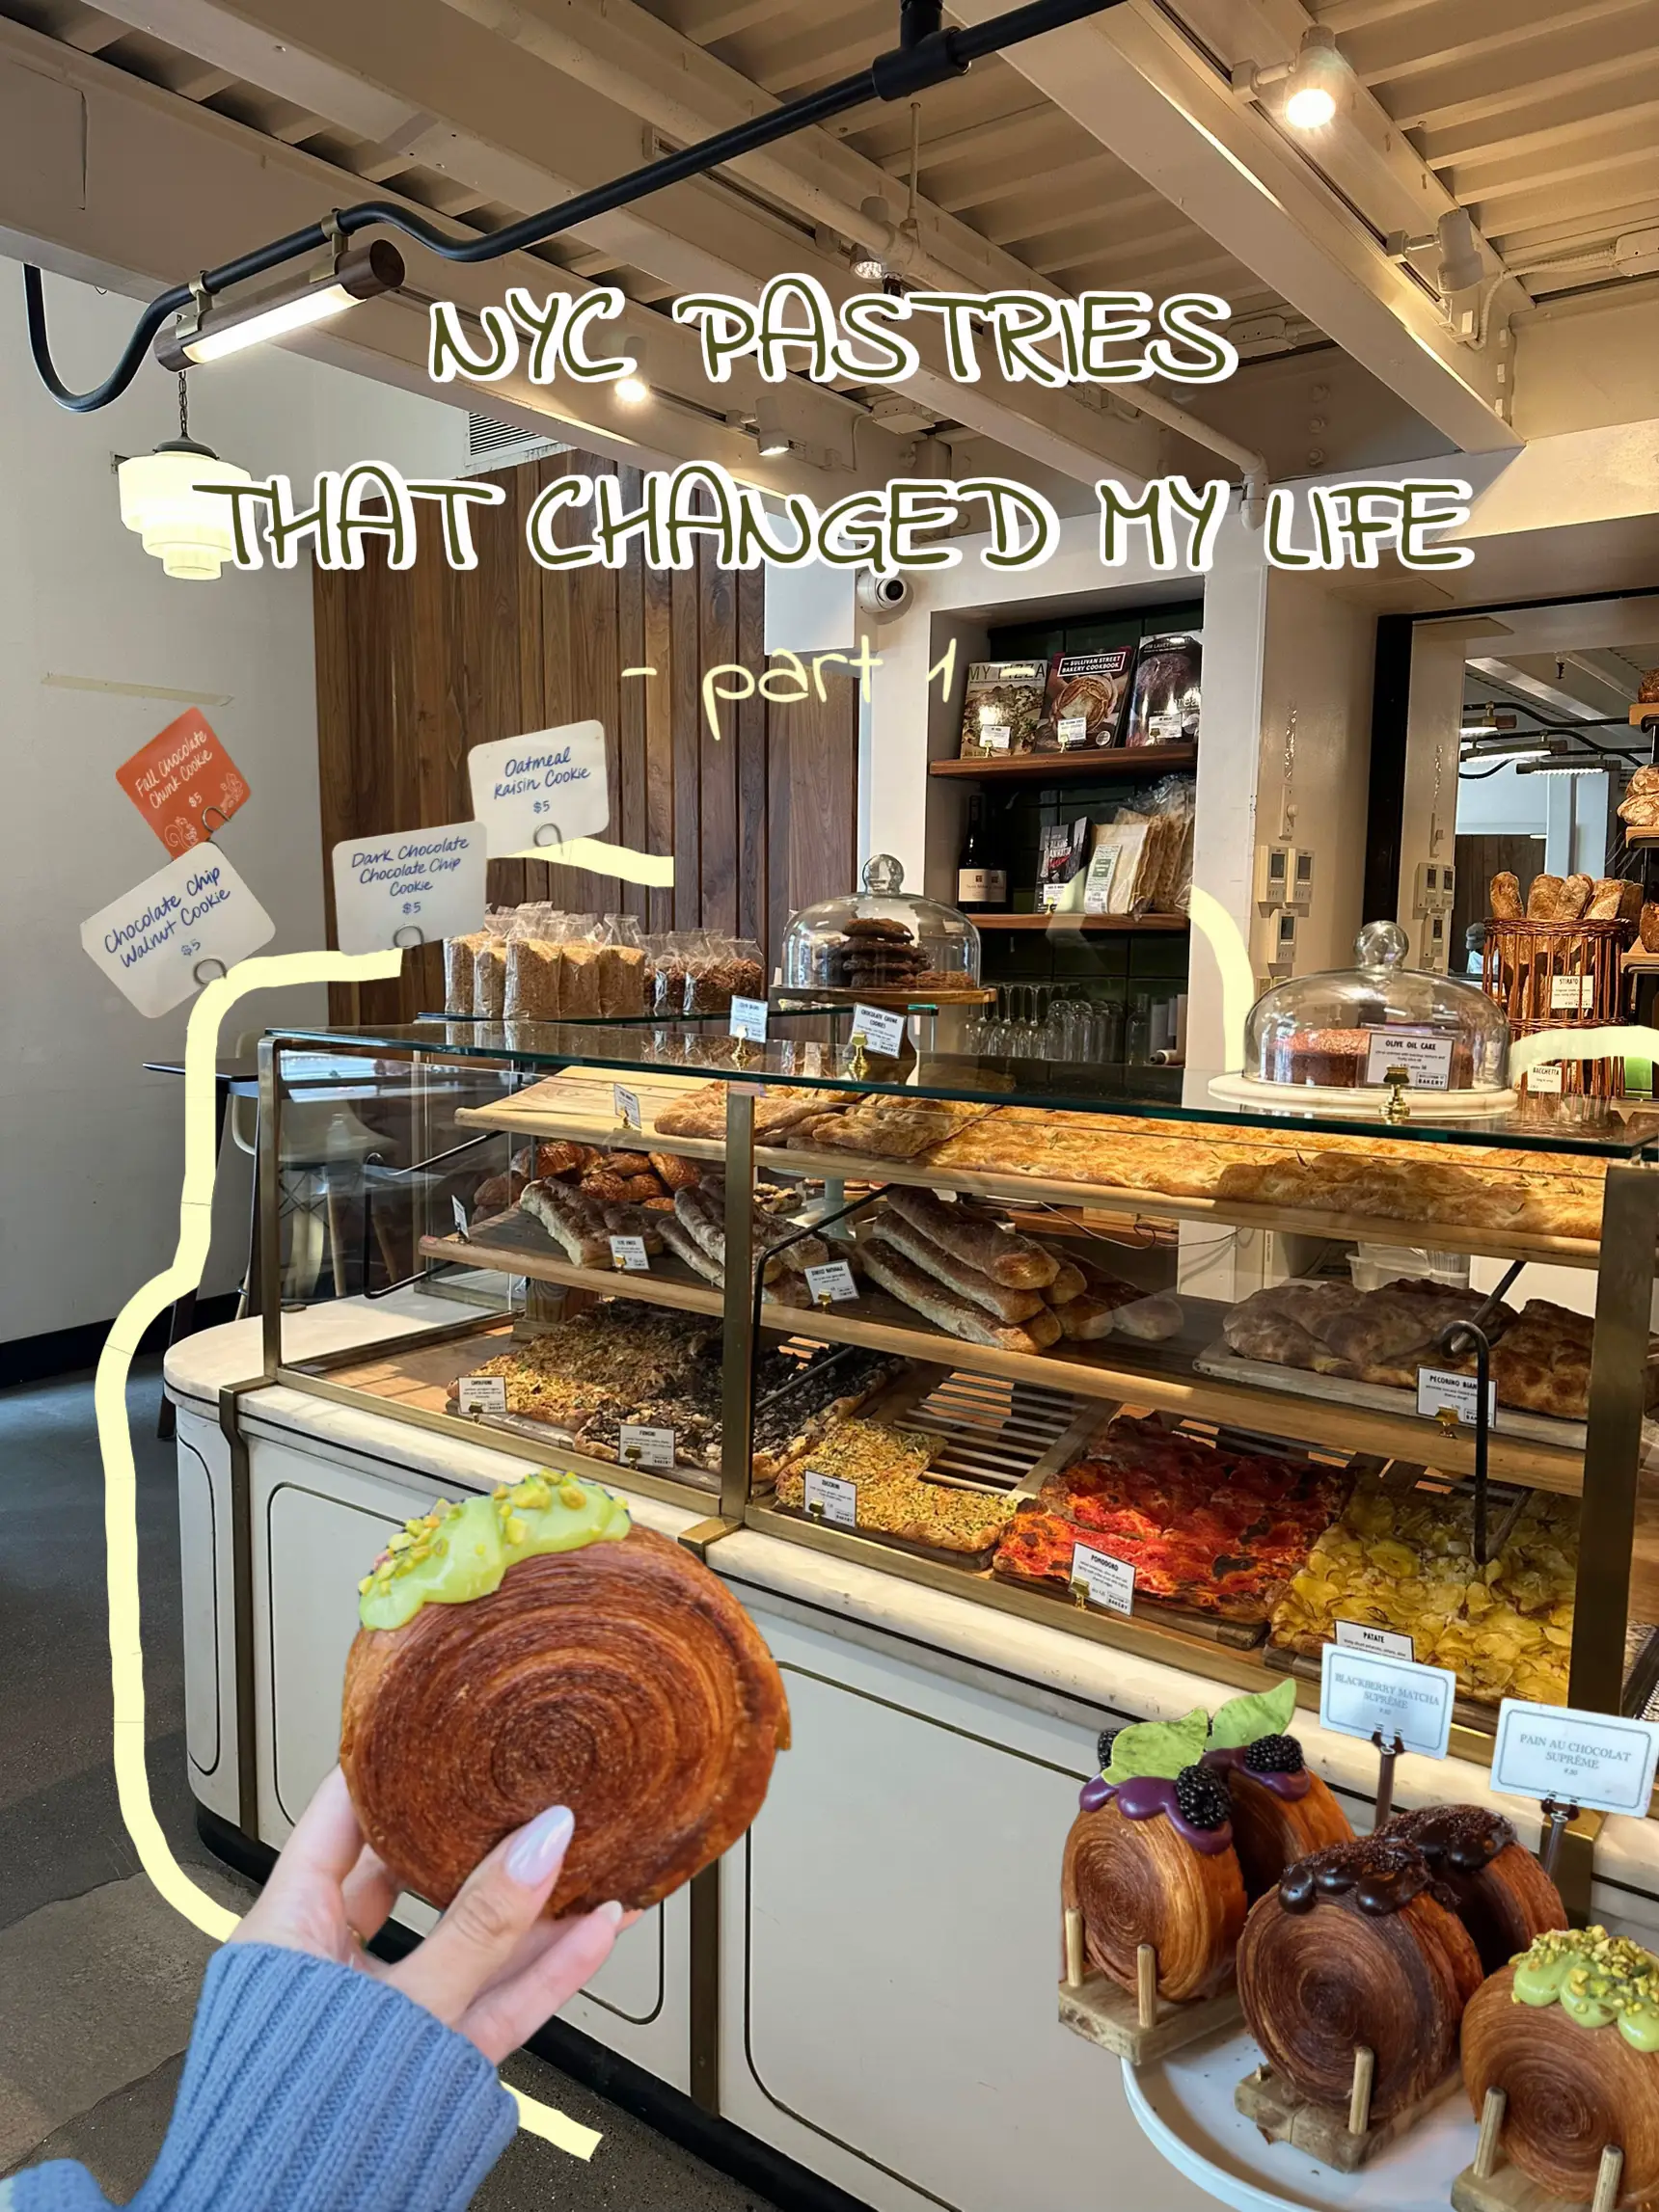 - NYC PASTRIES THAT CHANGED MY LIFE - 's images